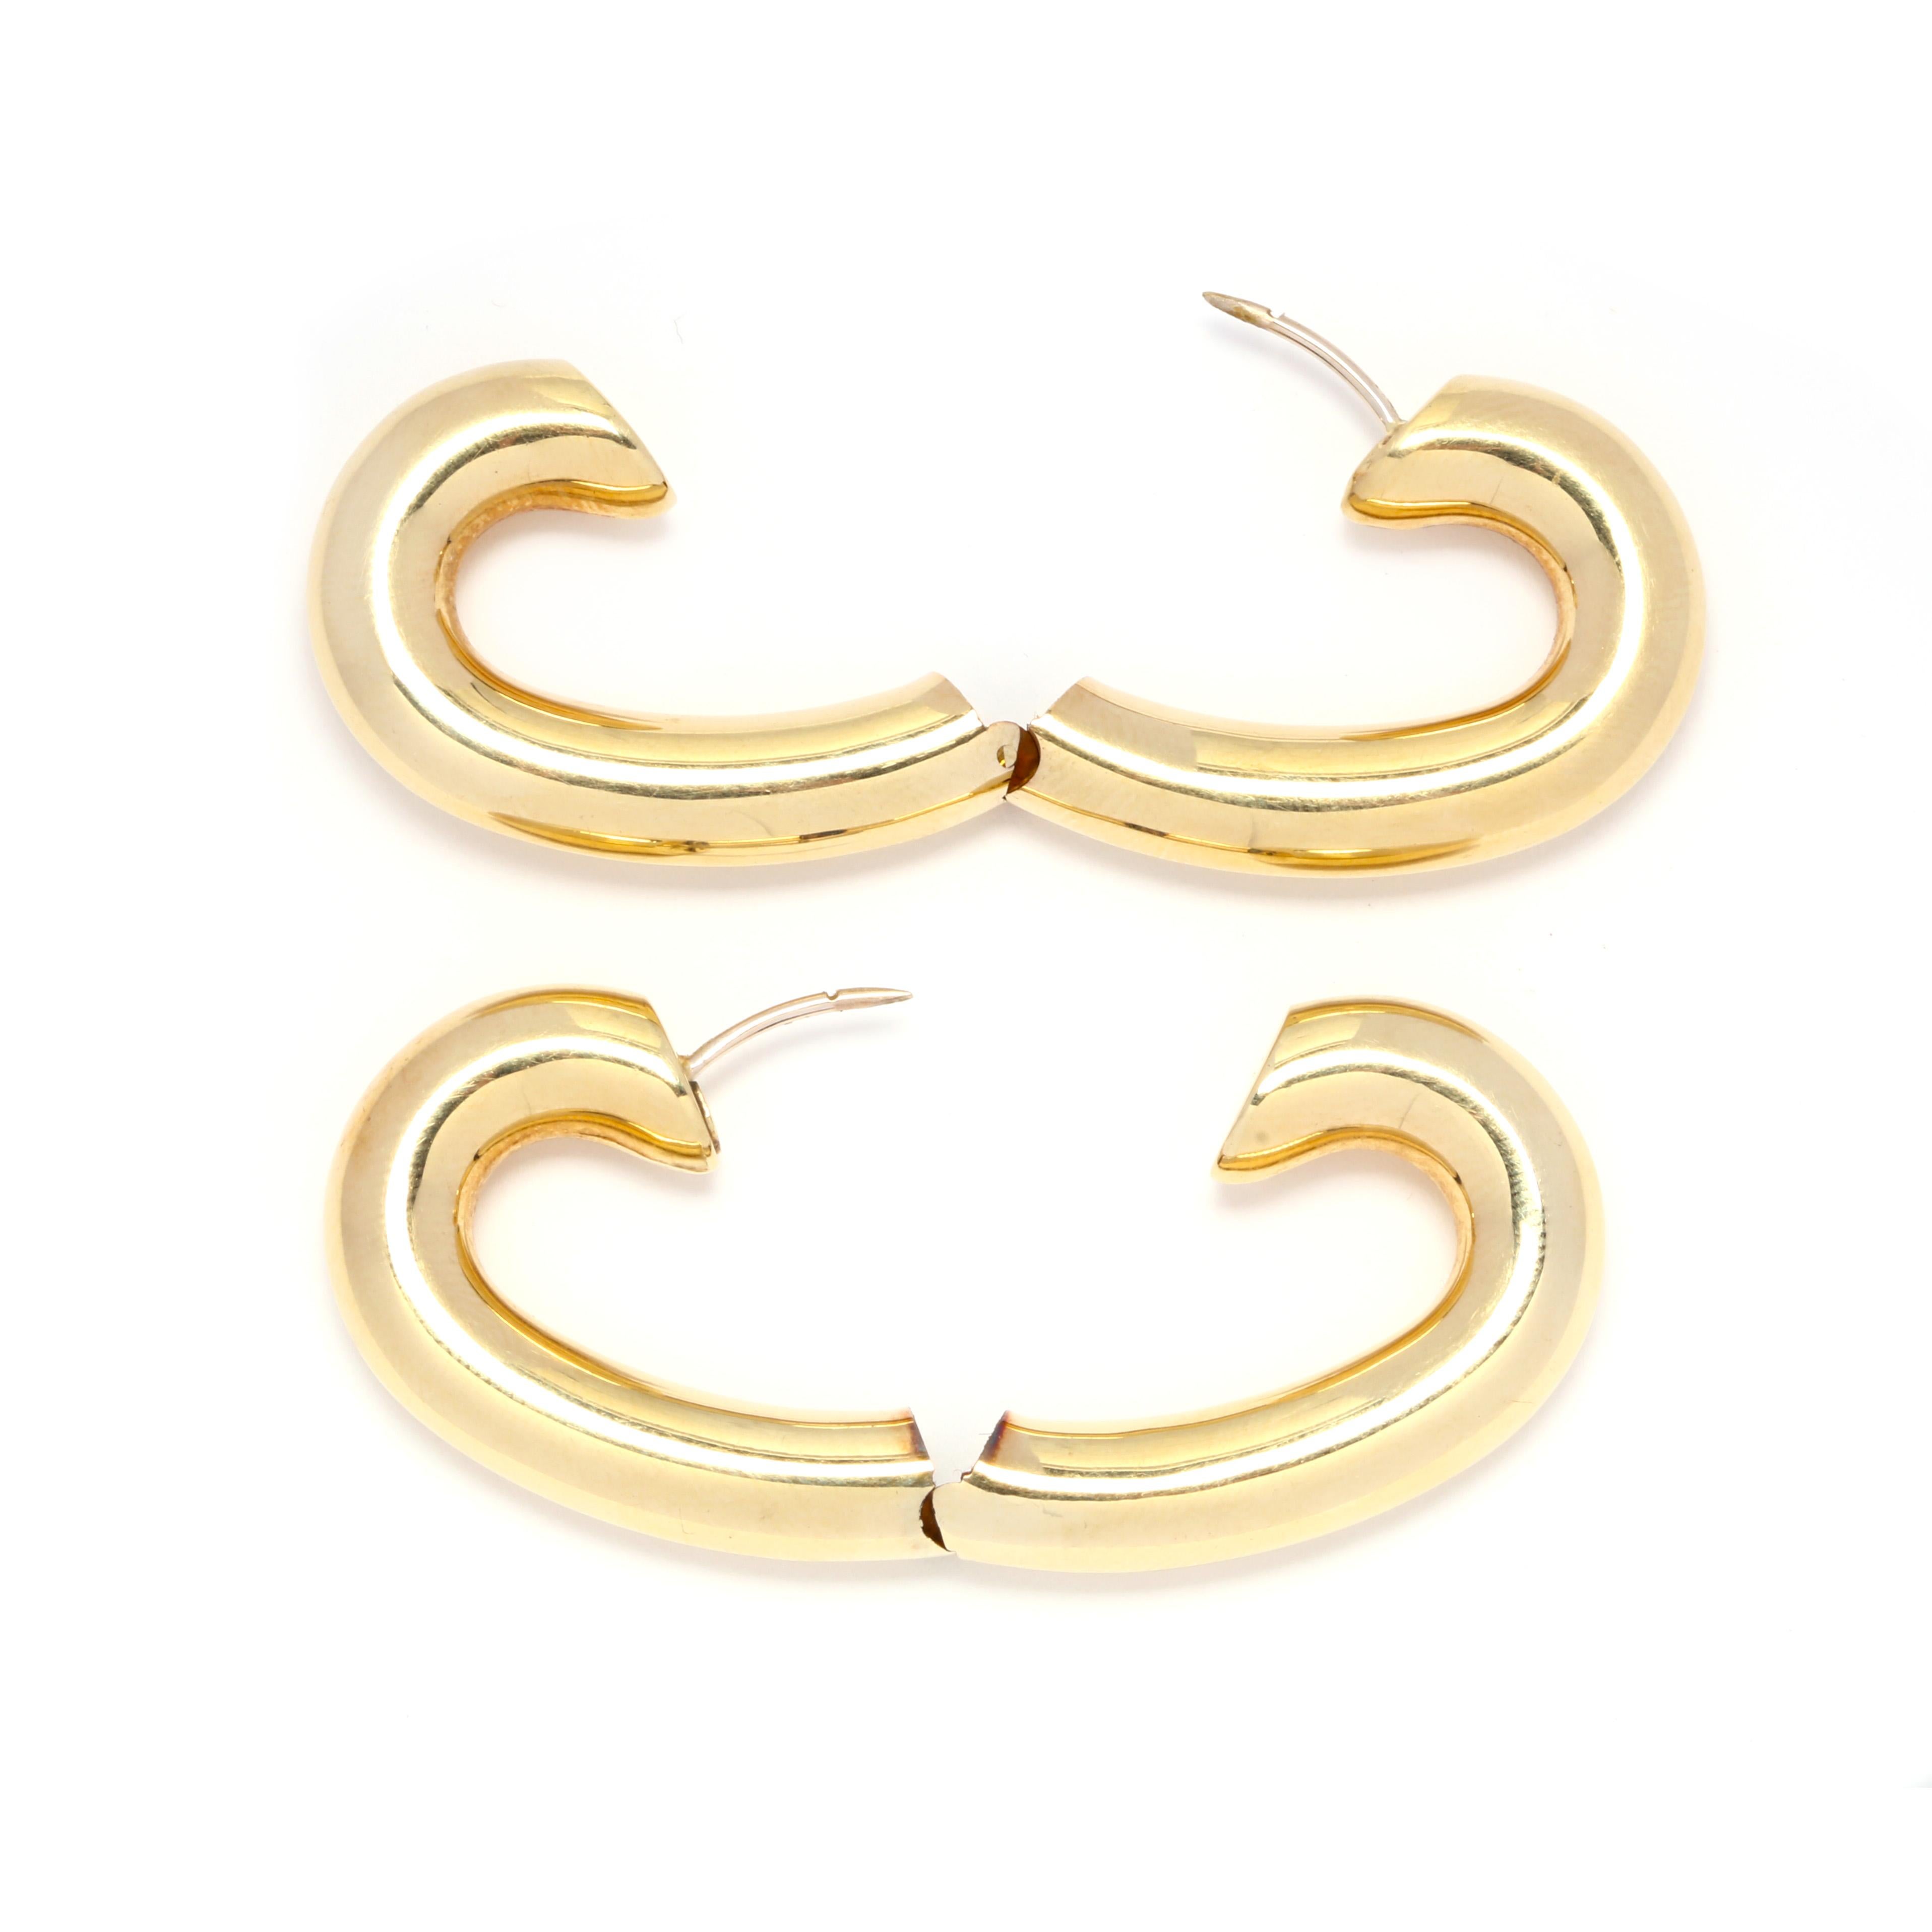 Circa 1980's, a pair of 14 karat gold large heart hoop earrings. A puffed, tube design with a hinge at the bottom.

Length 1.75 in.

Height 1.25 in.

Width 6.3 mm

9.96 dwts.

* Please note that this is a vintage item and may show signs of wear. It